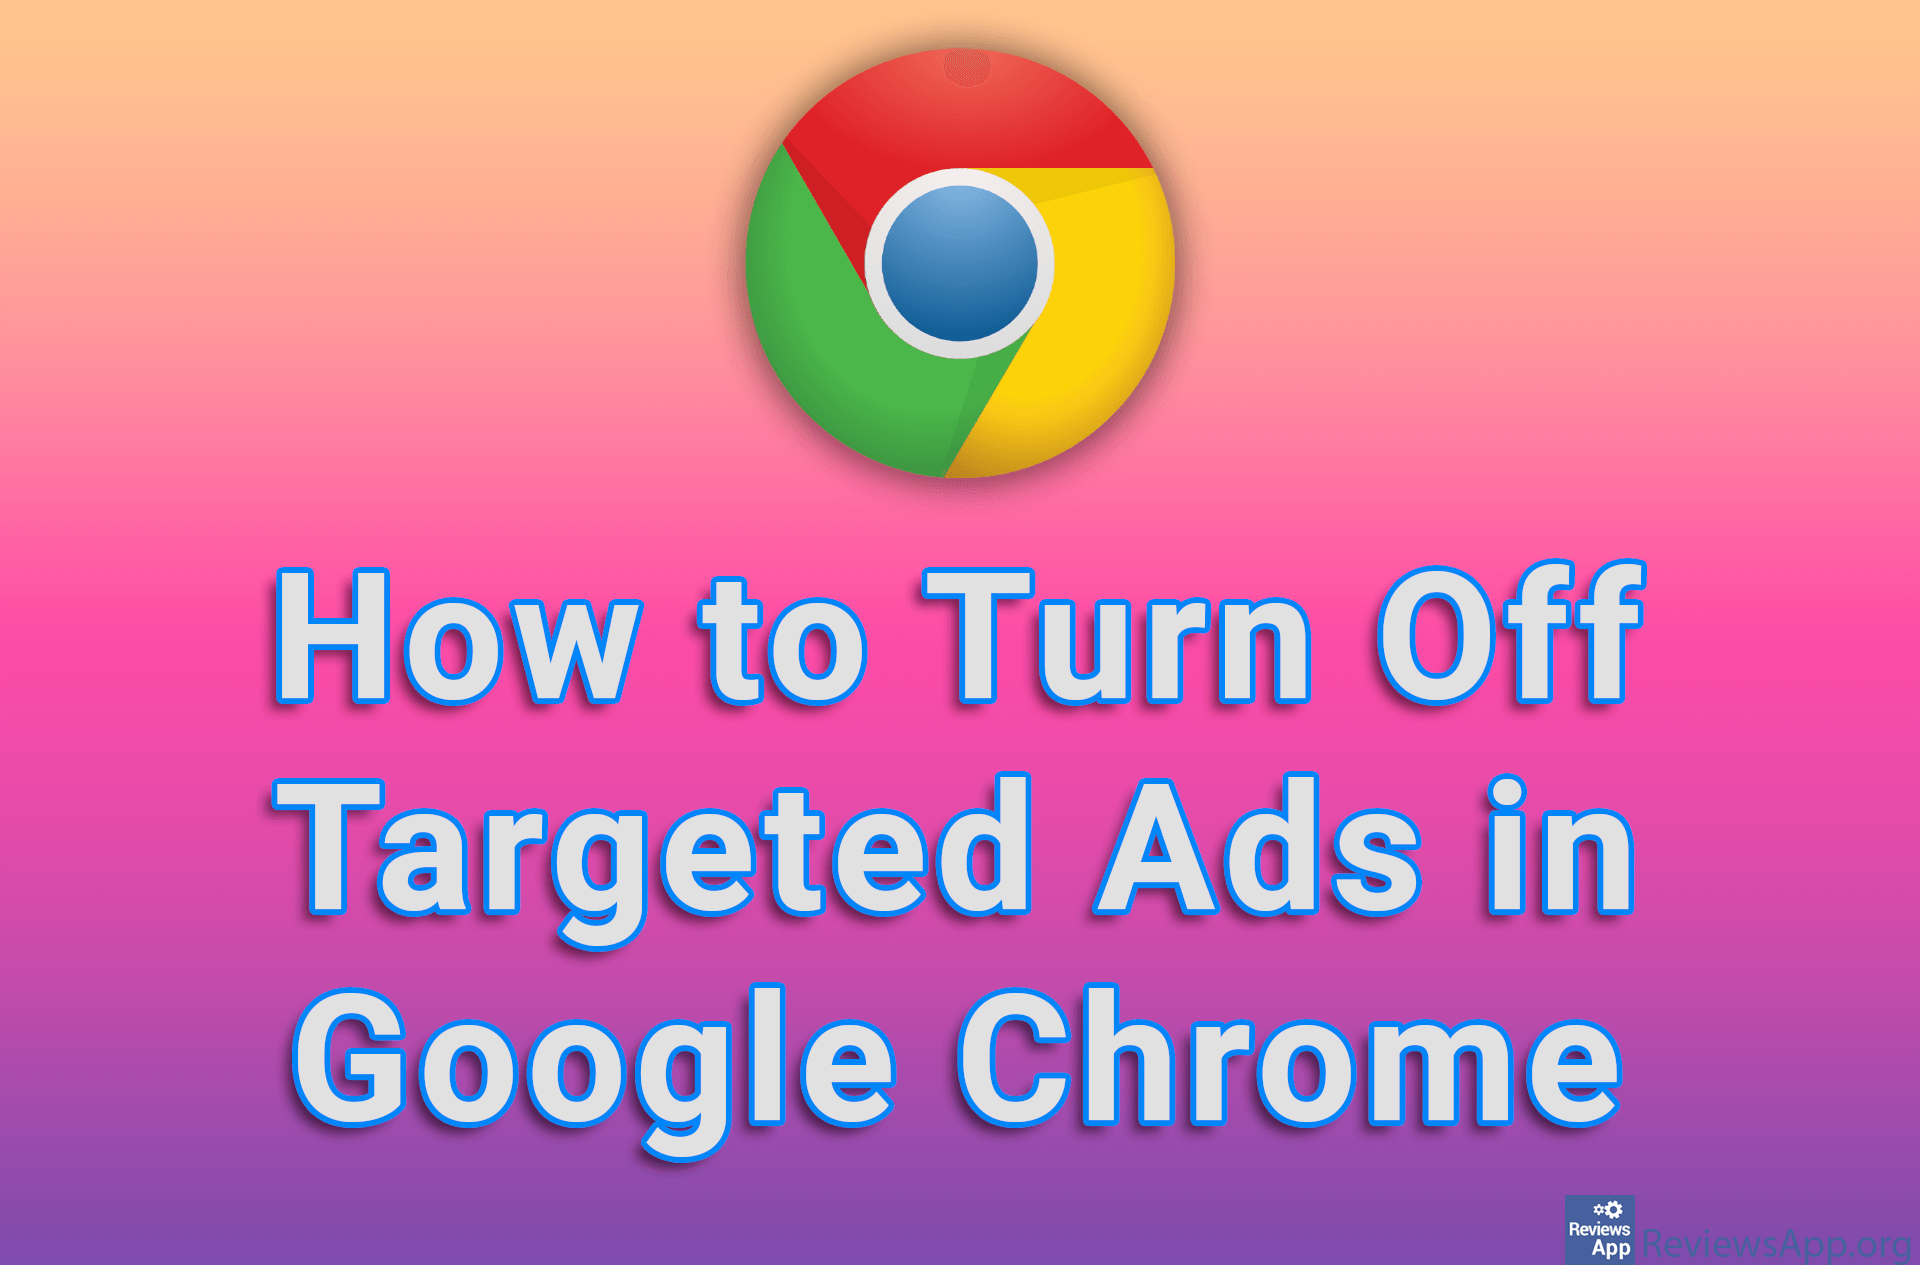 How to Turn Off Targeted Ads in Google Chrome